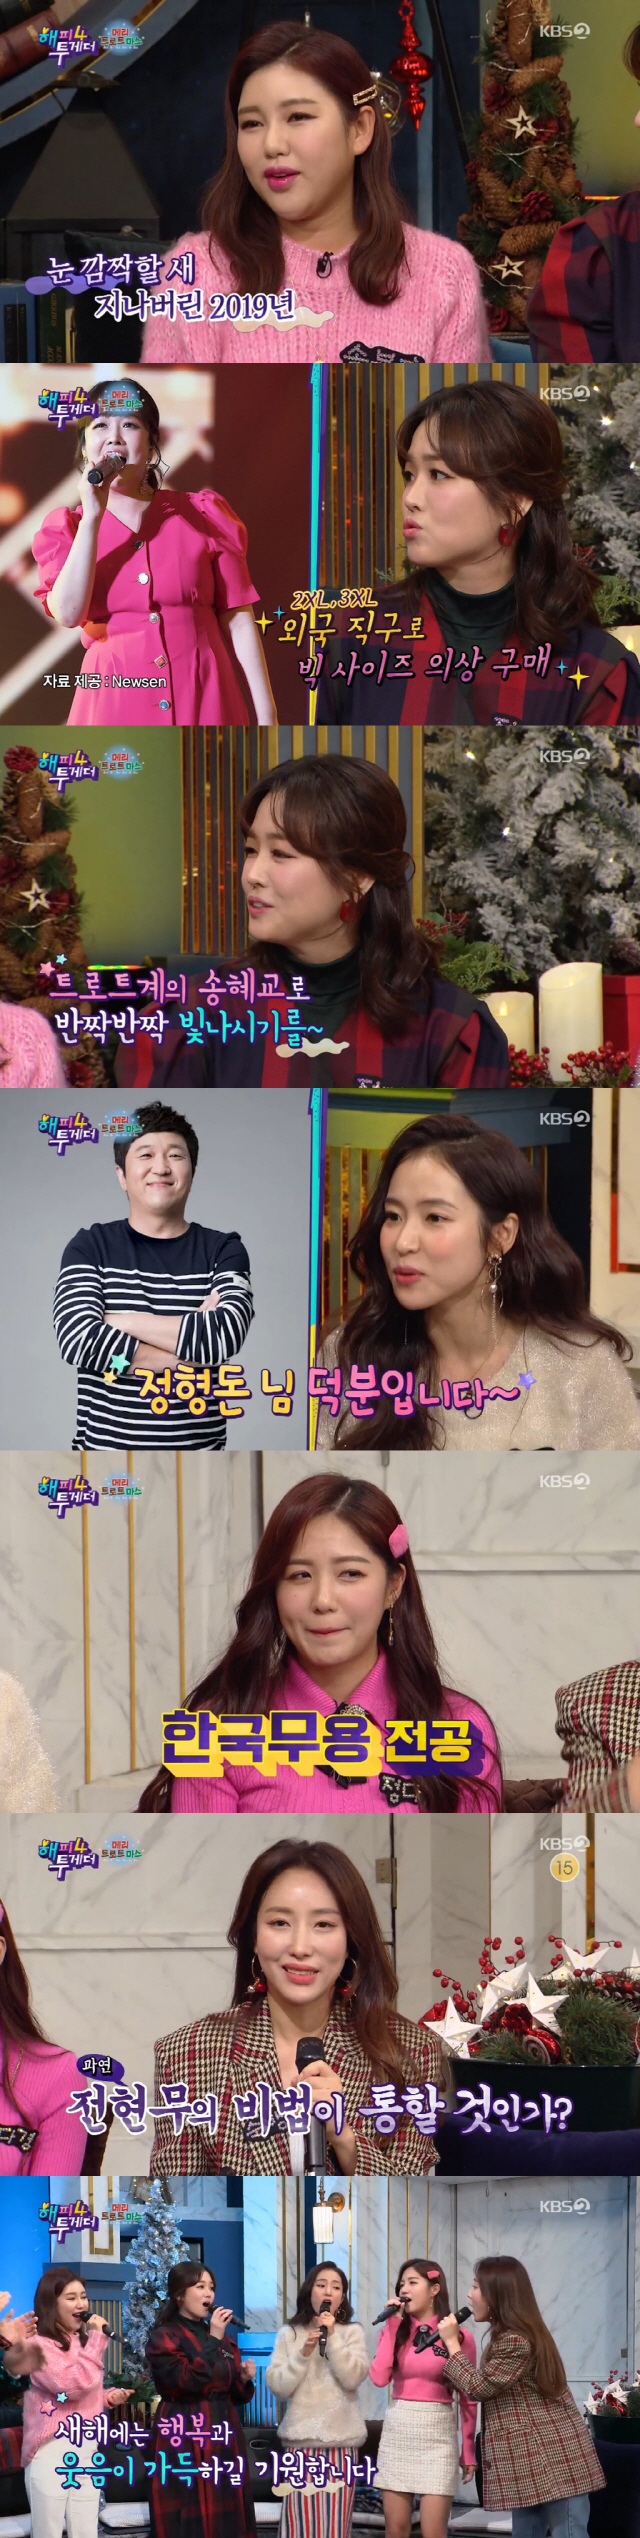 The excitement and dedication of Happy Together Trot actresses gave the best laugh.KBS 2TV Happy Together (hereinafter, The Battle 4), which was broadcast on December 26, was featured in Mary Trotmas.This feature, which was a total Super Wings of Song Ga-in, The Miami, Hongja, Jung Da Kyung, and Sook-haeng, which painted Korea as a Trot craze in 2019, became the best gift for viewers at the end of the year.The ratings also responded to the appearance of Trot actresses armed with excitement and dedication.According to Nielsen Korea, a ratings agency on December 27, the ratings of the broadcasts rose significantly from the previous broadcast, recording 5.5% of the nationwide ratings (1 parts) and 6.6% (2 parts).By metropolitan area, it recorded as much as 7.1% (part 2), proving that they are ratings fairy.Song Ga-in, who recently beat Pengsu in a vote and became the best hot star in 2019, said, This day is coming to live and live, and it is still a dream.He also proved to be the best star of the year, referring to popular culture and arts awards, concert sales, and awards ceremony performances.His anecdote, which values the unity of the party, created a new character called Songdae, but in addition to this, he was impressed by the way he took a younger generation than anyone else.I did not even fit 2XL or 3XL, but now I have lost a size of 66, said The Miami, who appeared to be out of weight.When another cast member found Song Hye-kyos face in the lost weight Song Ga-in, he first denied it, saying, I actually heard such a story from a young age.Hongja, who says this year is the year of reincarnation, laughed when he said he lost his real name Park Ji-min at home and said, My mother also calls me Hongja.He said, I want to buy you a meal of rice, saying, Hongja, which is more like a real name than his real name, was born thanks to Jung Hyung Don.The Korean dance version of Mamma Mus HIP, which boasts a beautiful dance line, and the parade of the trot-based Psy Heungseng-heungsa, also focused attention.In addition, Jung Dae-kyung introduced the way to be a drink at the end of the year, and all of them burst into bread, and the song of Beyonce was reinterpreted as Trot, saying that any song can be trotted.FLEX, a Trot actress due to her income that changed this year, also attracted attention.From Song Ga-in, who added the apartment prices of his own brothers, to The Miami, the first luxury shopping, to Hongja, whose income increased 20 times.The story of those who are having a rich year-end with the love of their fans was surprising.In addition, the lecture of the seniors toward the trot-based super-class newcomer, the legacy, was a laughing point.It is a one-point lesson for strong control, vibration, stage manners, etc., and upgraded the heritage chain further.In addition, Song Ga-in proposed a duet with Yun Song and said, The profit is 5 to 5, and the song is more.As Trot Avengers gathered, they could not miss the song Gift, and they sang their own life songs with their stories, and they were moistened with emotion on Thursday night of viewers.Finally, their carols unfolded, giving them magical happiness on the last Thursday night in 2019.Meanwhile, KBS 2TV Happy Together, a magical Thursday night with the best stars, is broadcast every Thursday night at 11:10 pm.